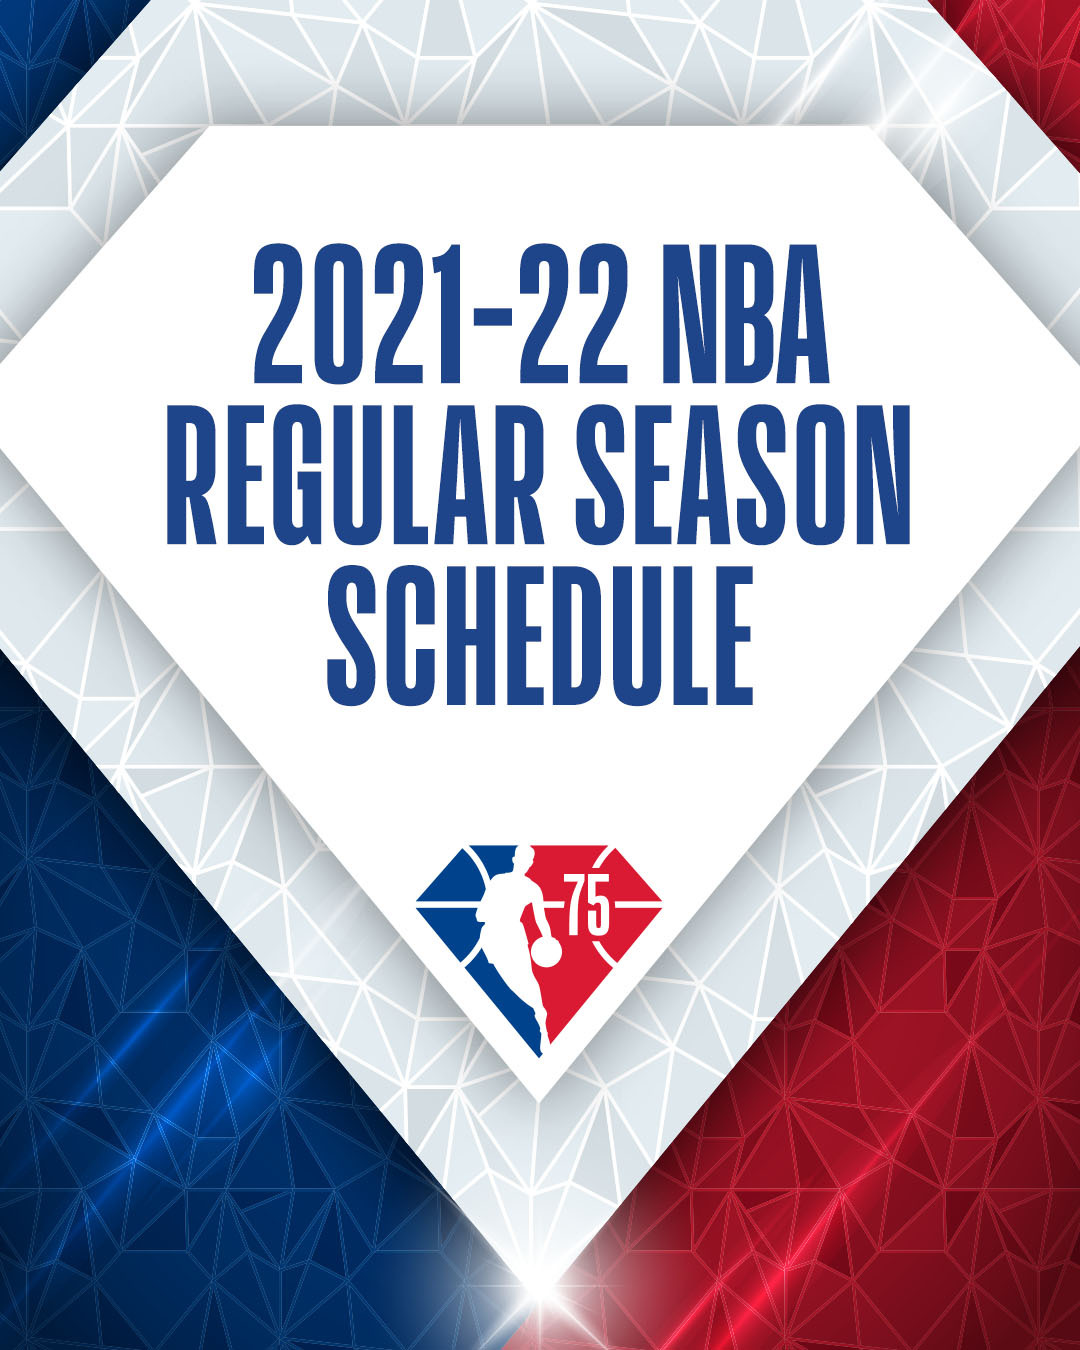 Nba 2022 Season Schedule Nba On Twitter: "The 2021-22 Regular Season Will Tip Off On Tuesday, Oct.  19, 2021, And Conclude On Sunday, April 10, 2022 For The Landmark 75Th  Anniversary Season! #Nba75 Full Schedule: Https://T.co/Qwgitcbhgc